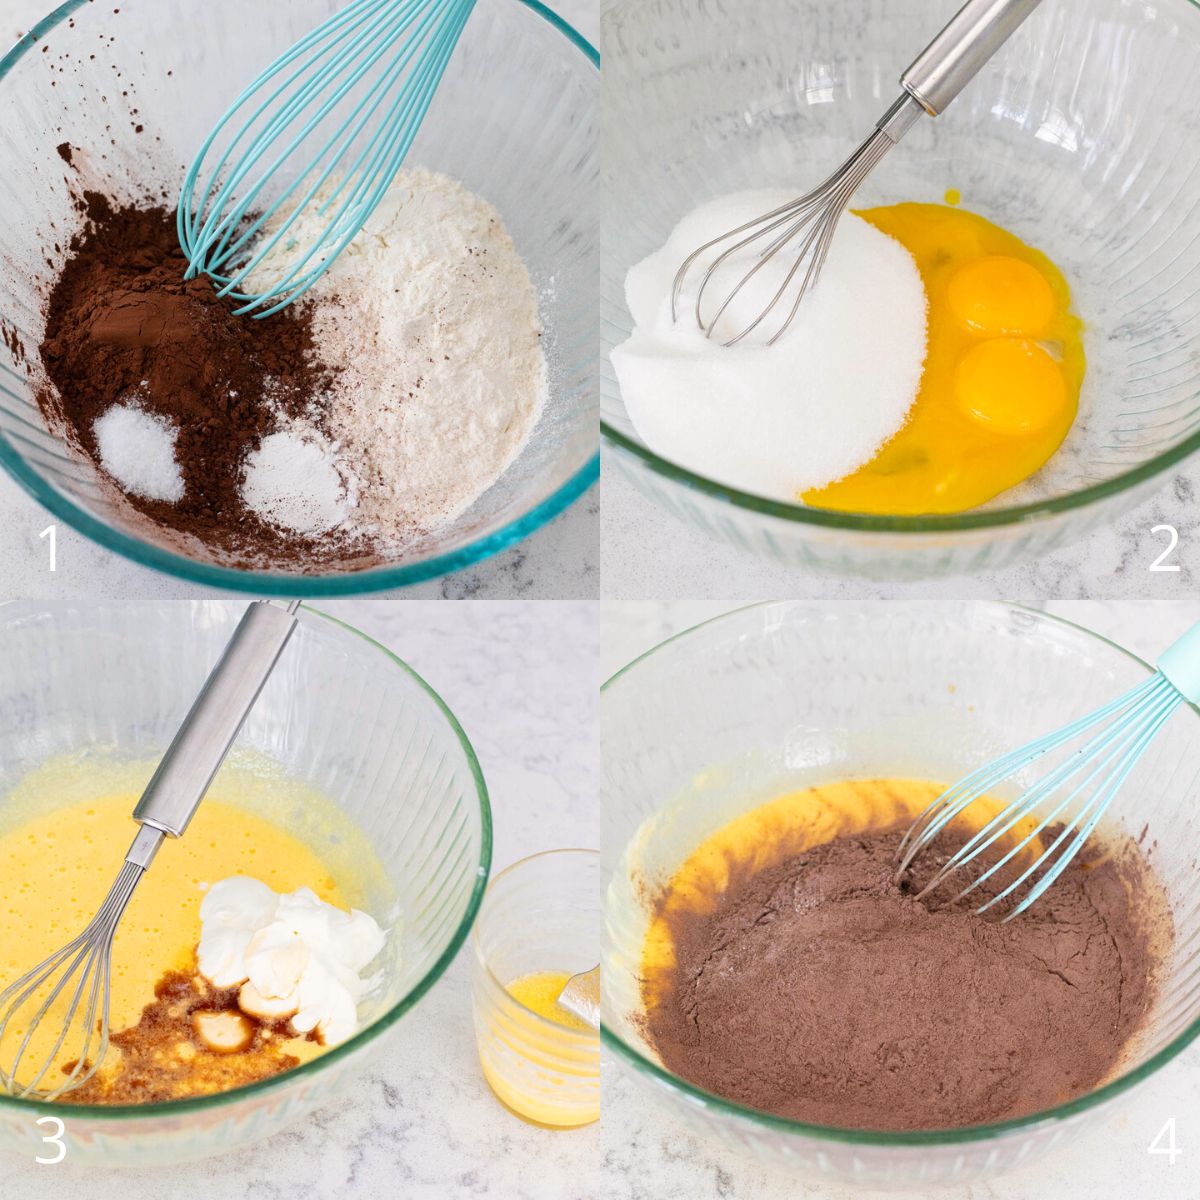 The step by step photos show how to prepare the chocolate cake batter.